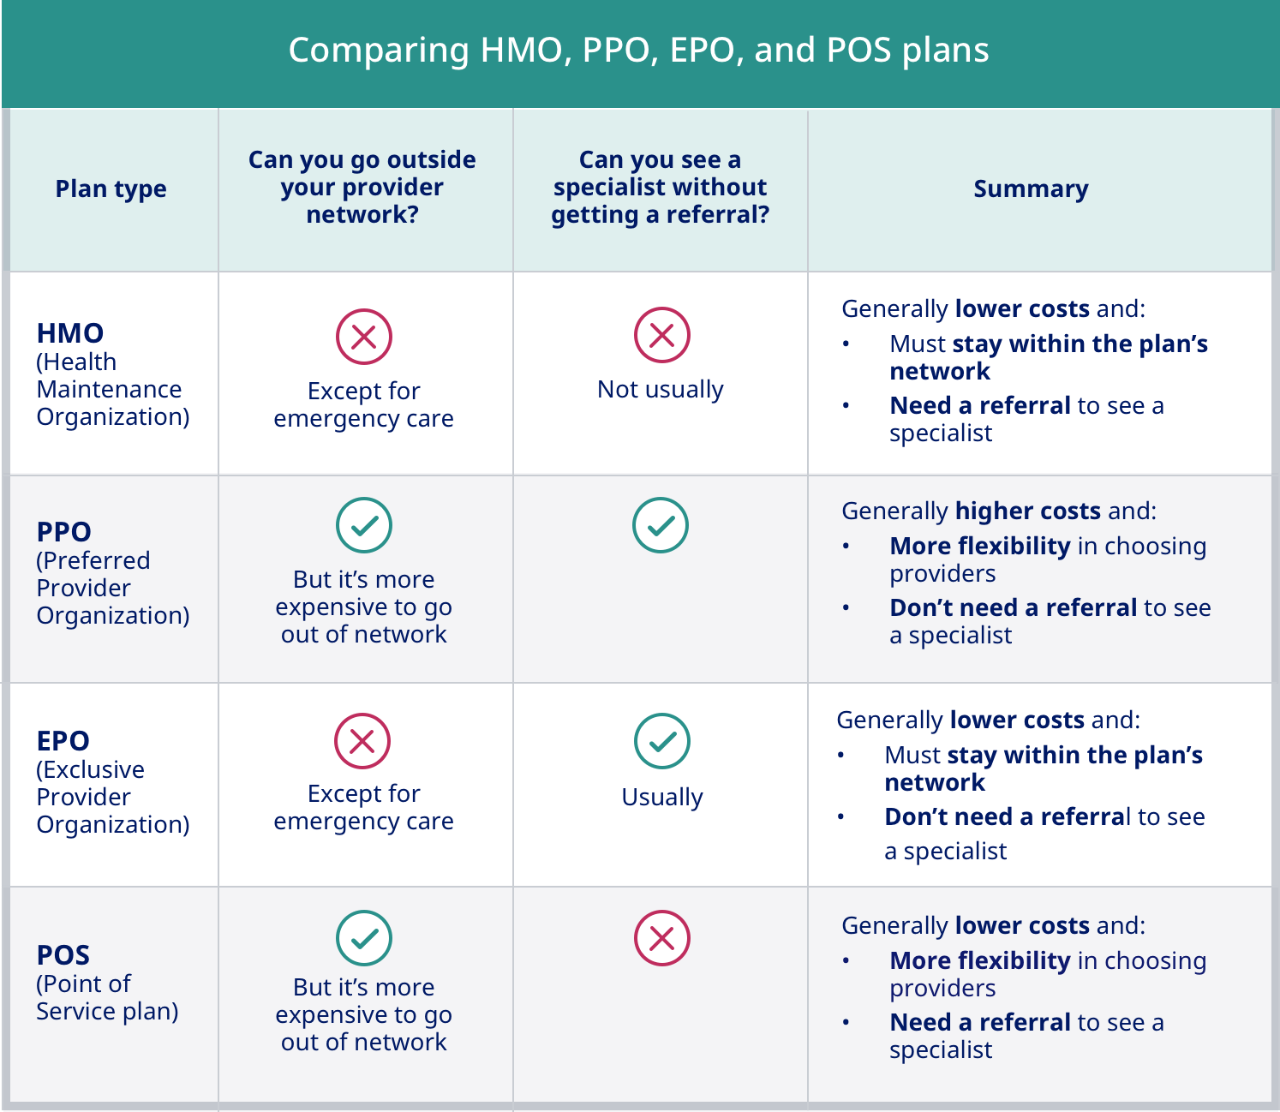 Comparing HMO, PPO, EPO, and POS plans 